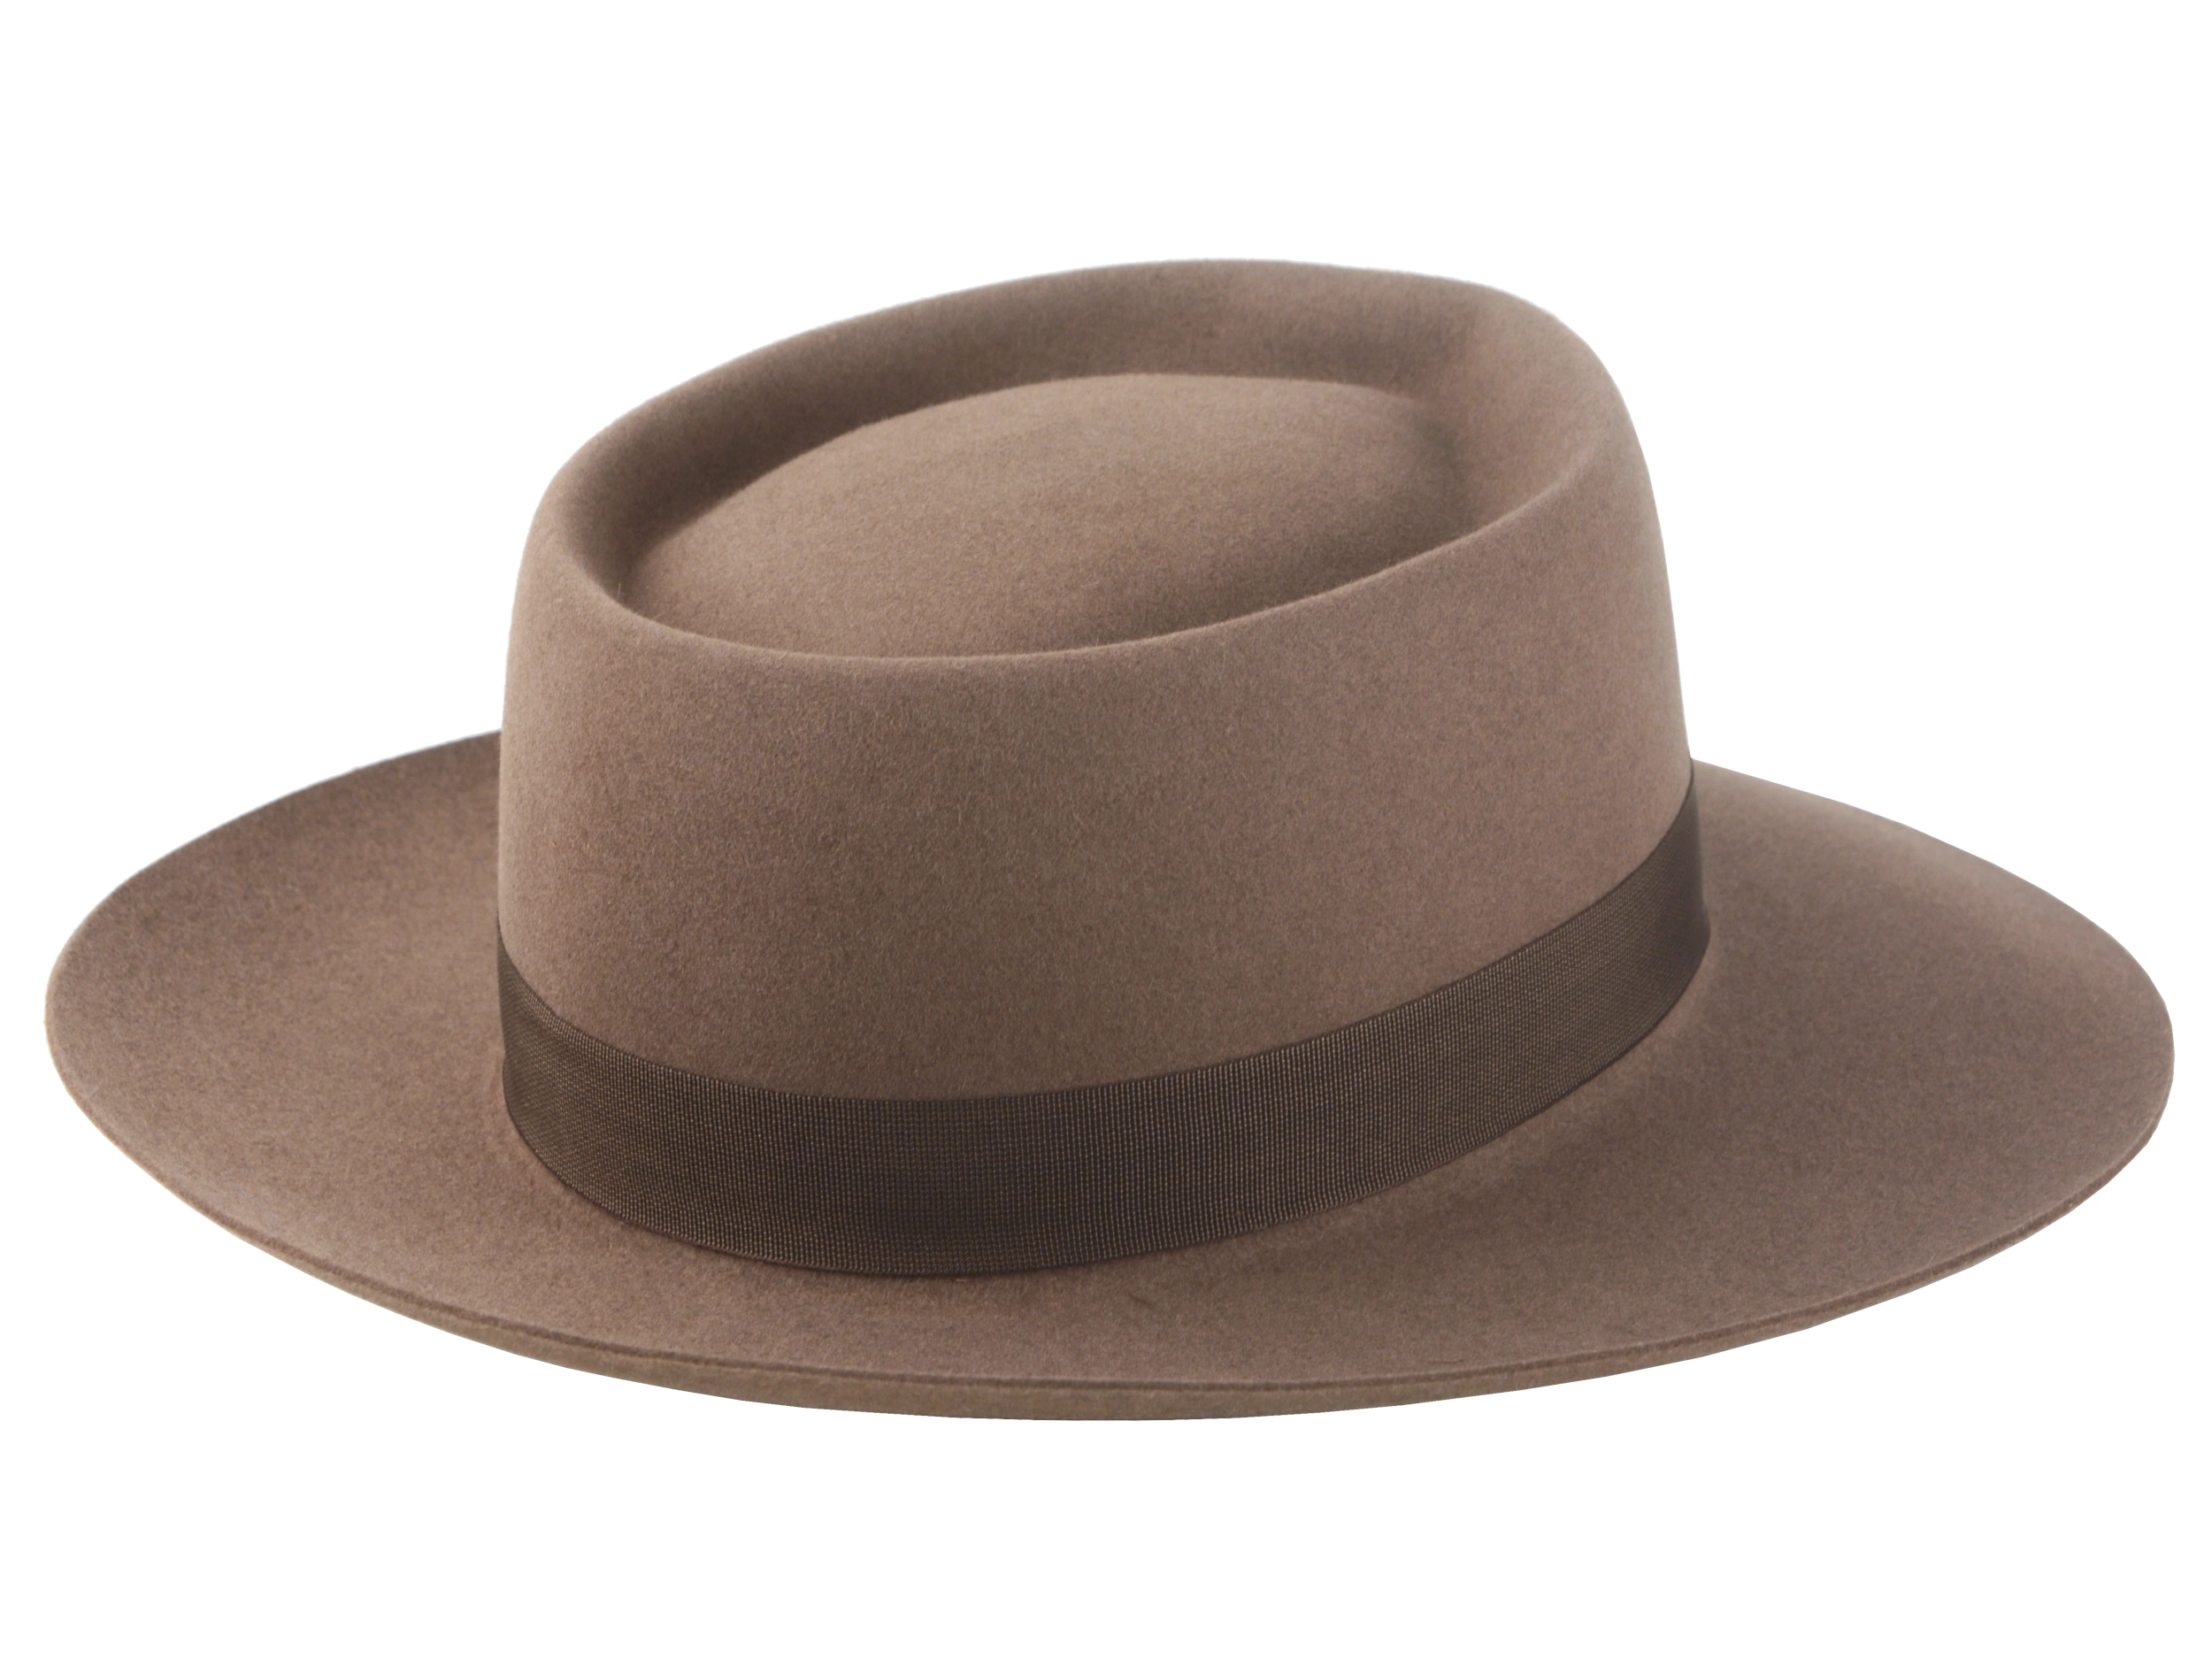 Artisanal wide-brim porkpie hat, named Oppenheimer, in premium beaver felt showcasing the raw edge brim and adorned with a vintage quality ribbon in pecan color against the coffee-hued backdrop of the hat body 4